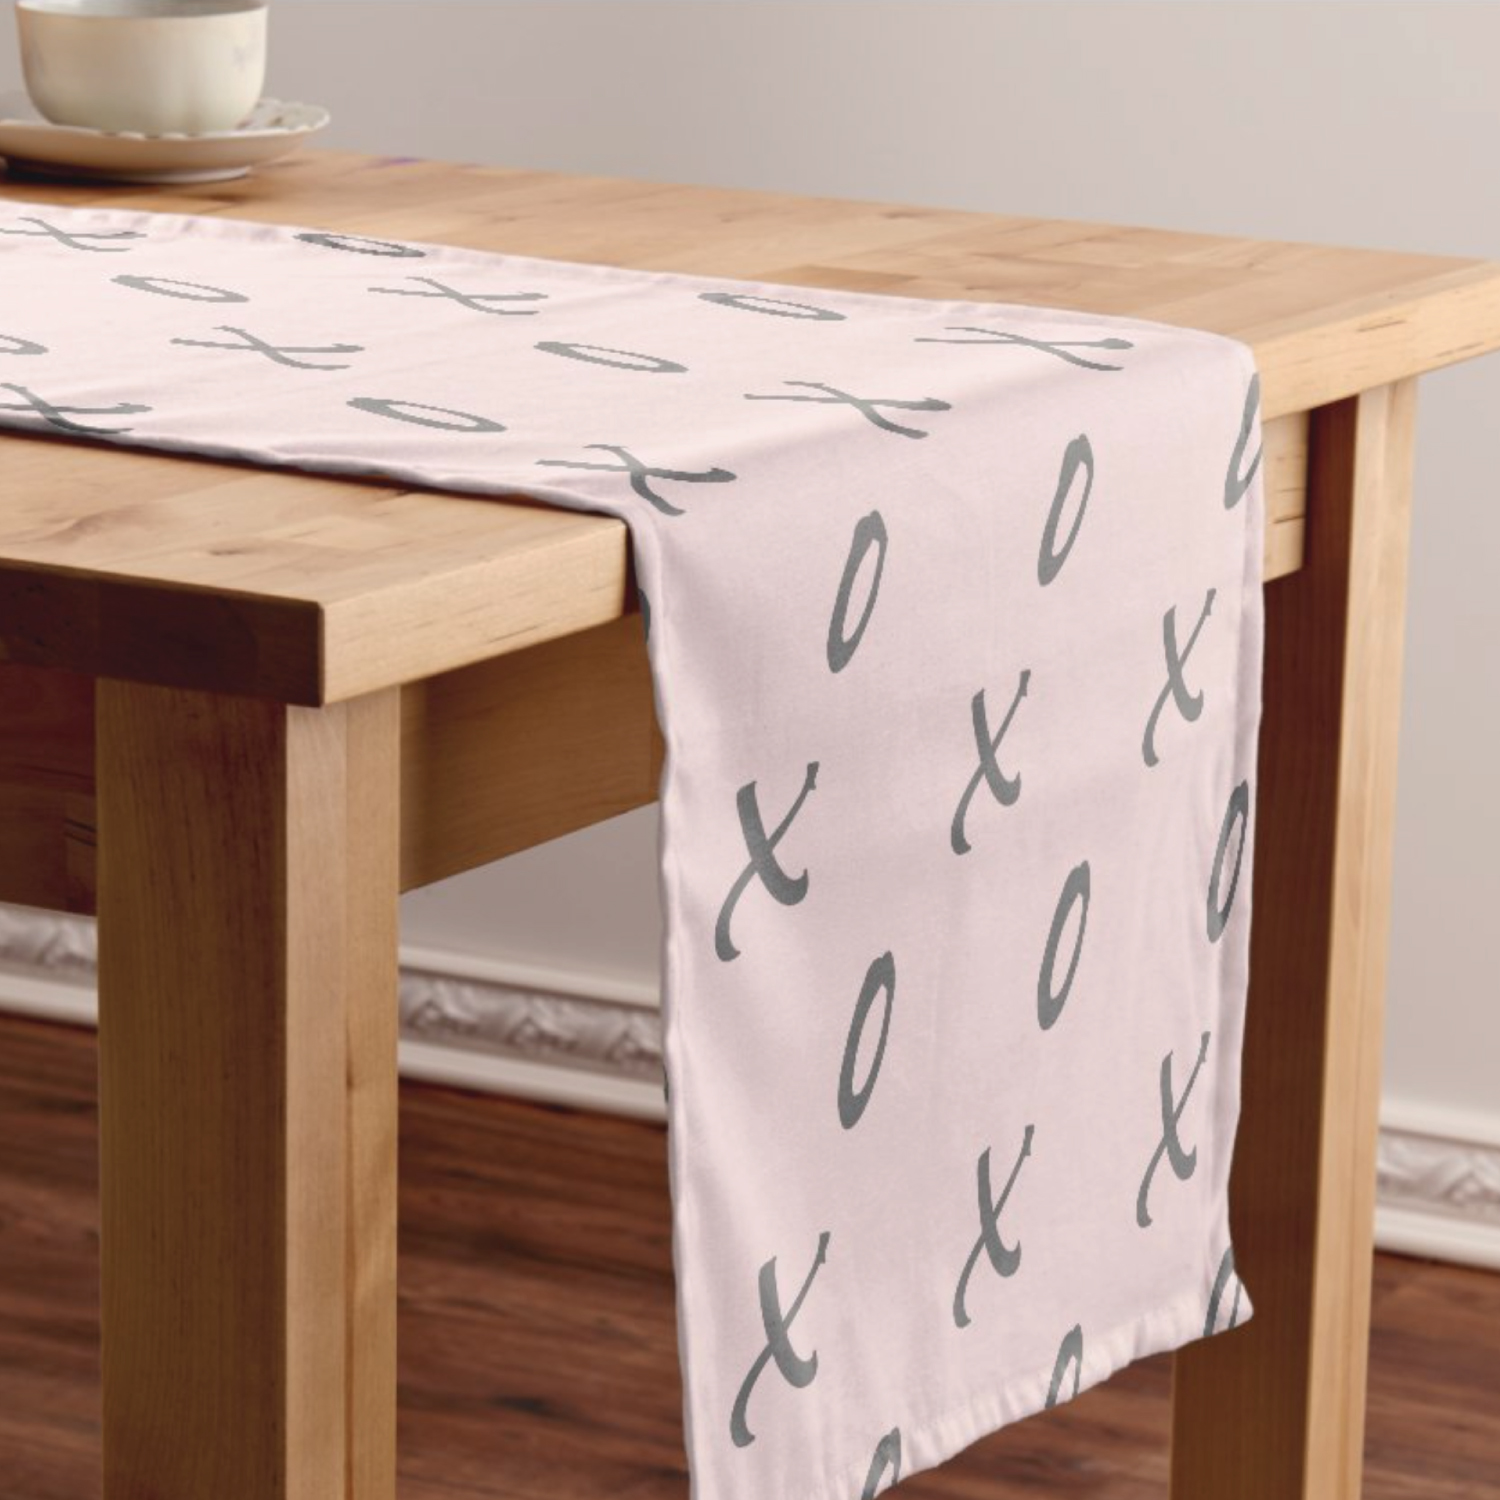 This modern pink and gray table runner is perfect for Valentine's and Galentine's day parties. It features a pattern of x's and o's. Use as a party decoration, home decor, baby shower or anything you like. Click to shop